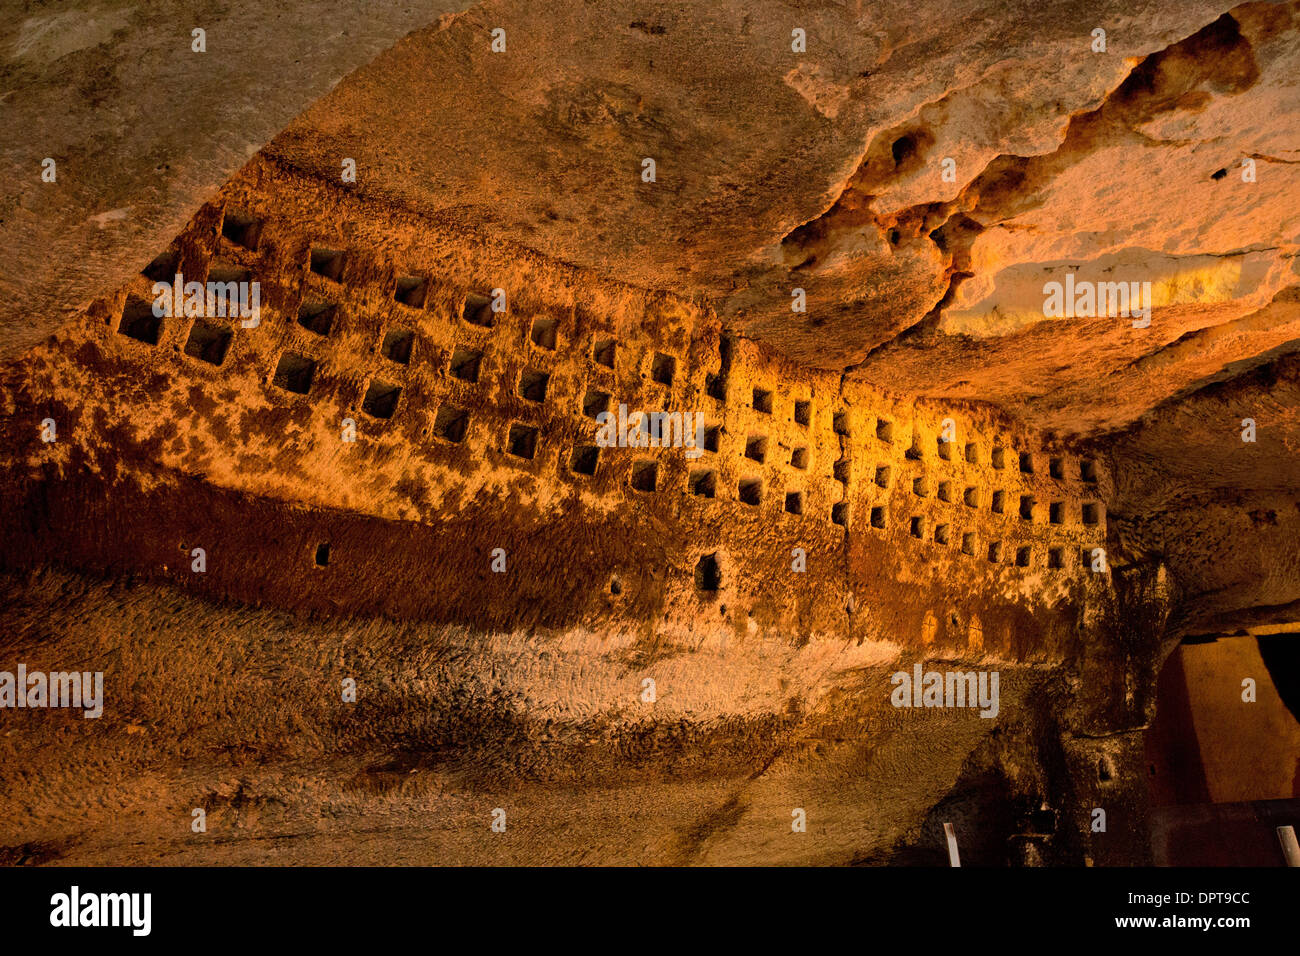 Dovecotes in the ancient troglodyte caves in the Benedictine Abbey of Brantome, Perigord, France Stock Photo